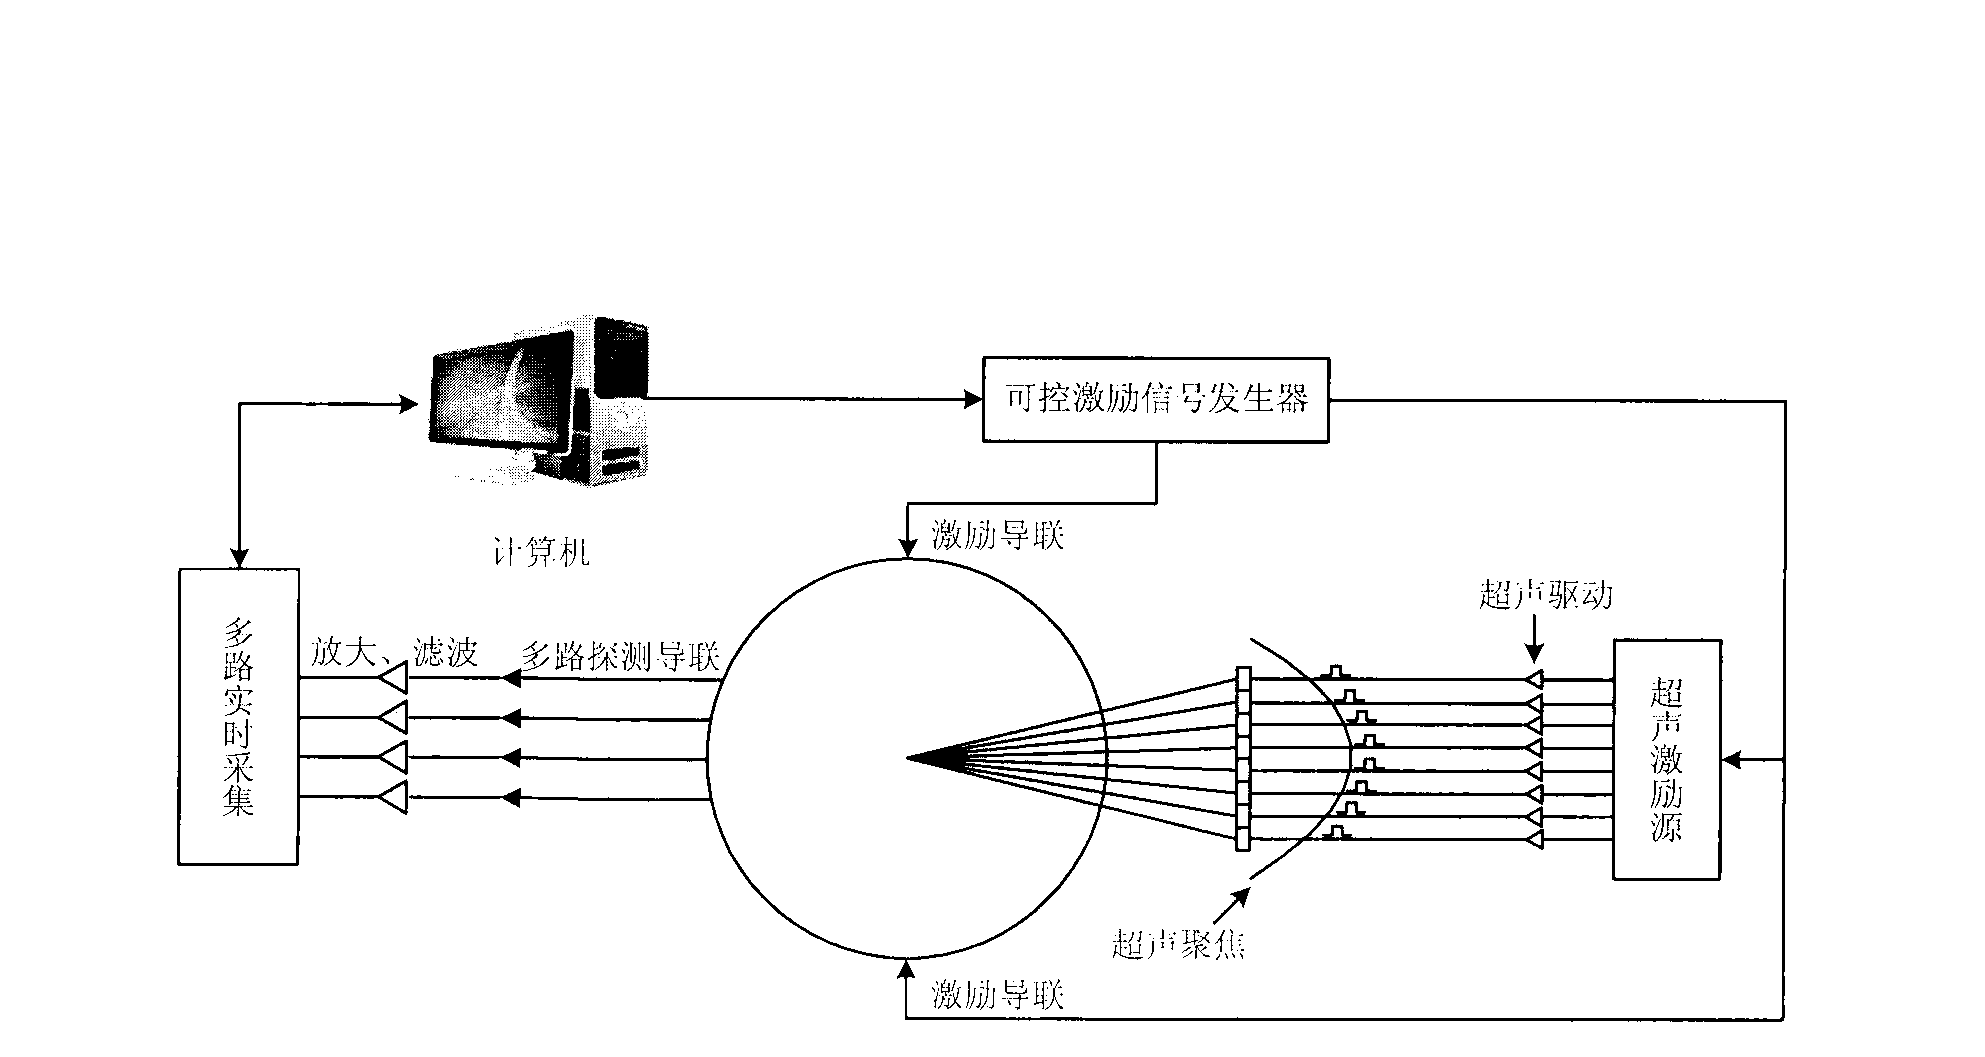 Electrical impedance imaging method of ultrasonic-synergy biological tissue